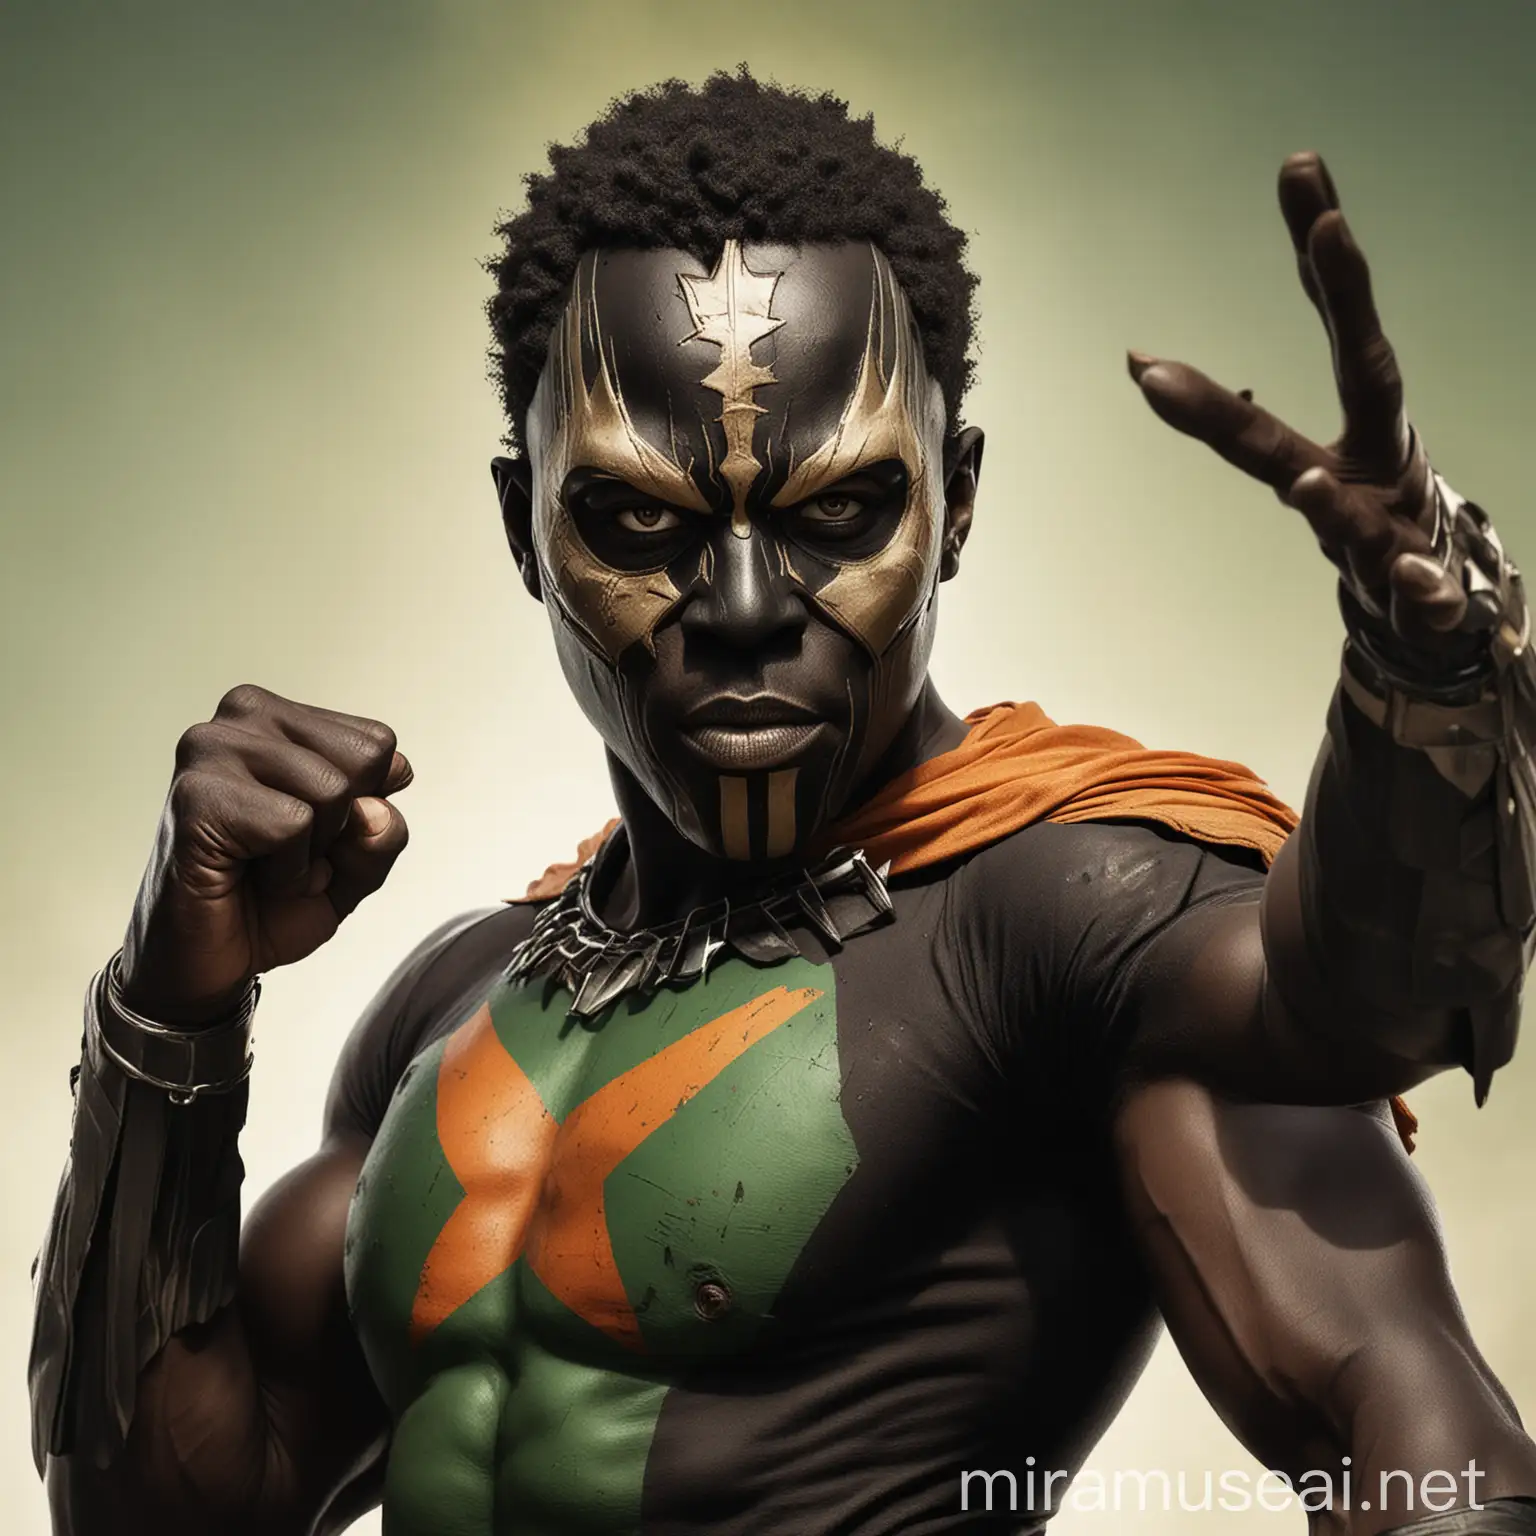 imagine an African superhero with a predominantly black mask and hints of orange, white and green, with a clenched fist and raised hand